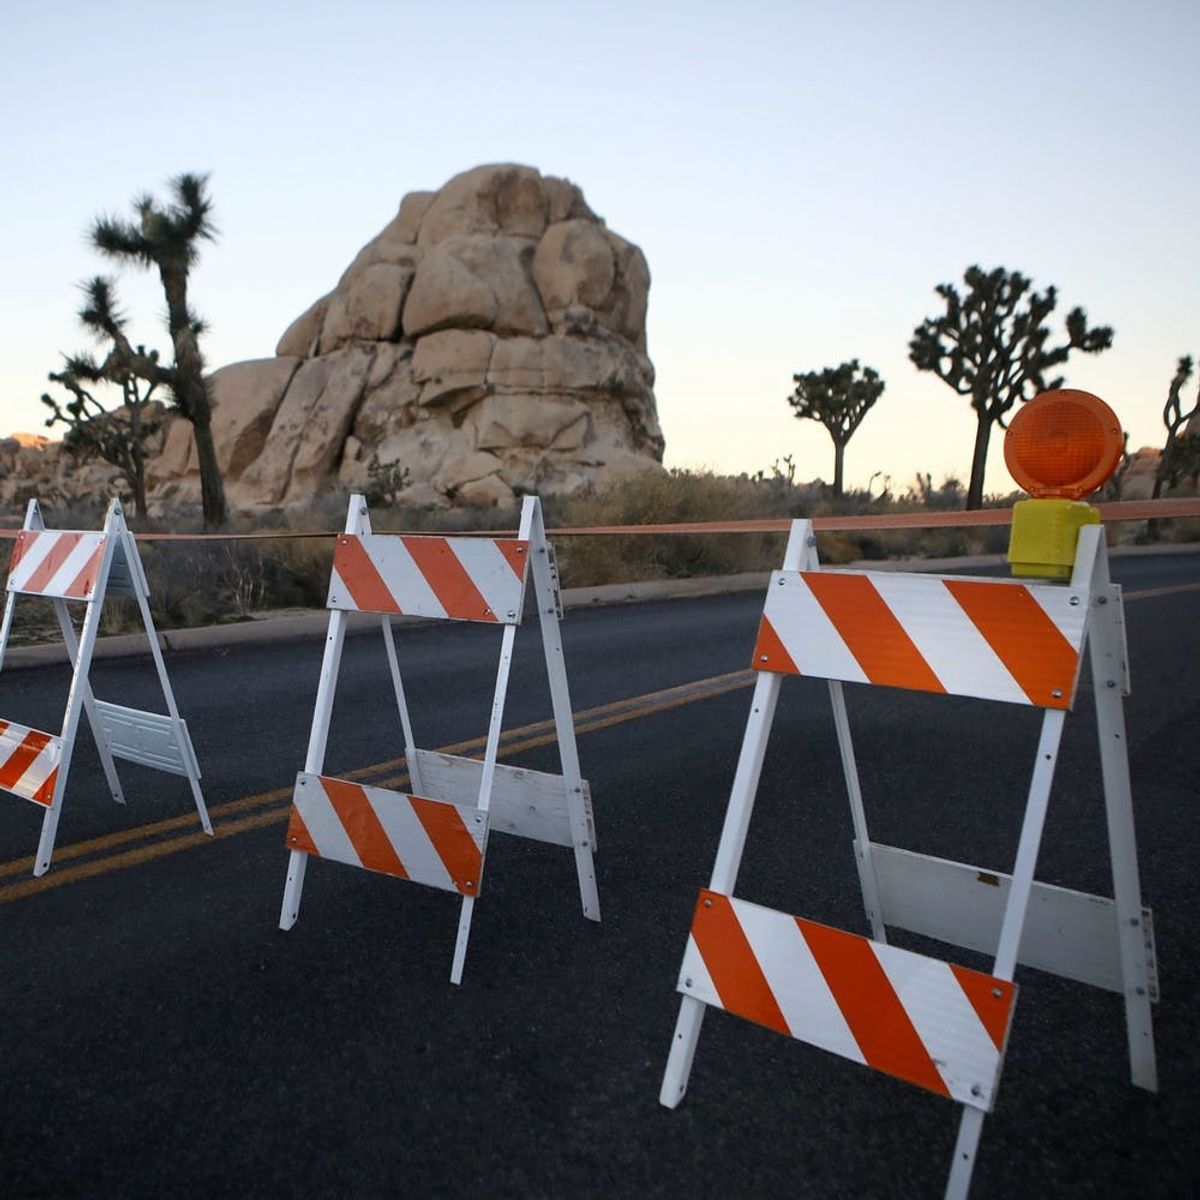 People Pooped All Over Joshua Tree National Park During the Shutdown